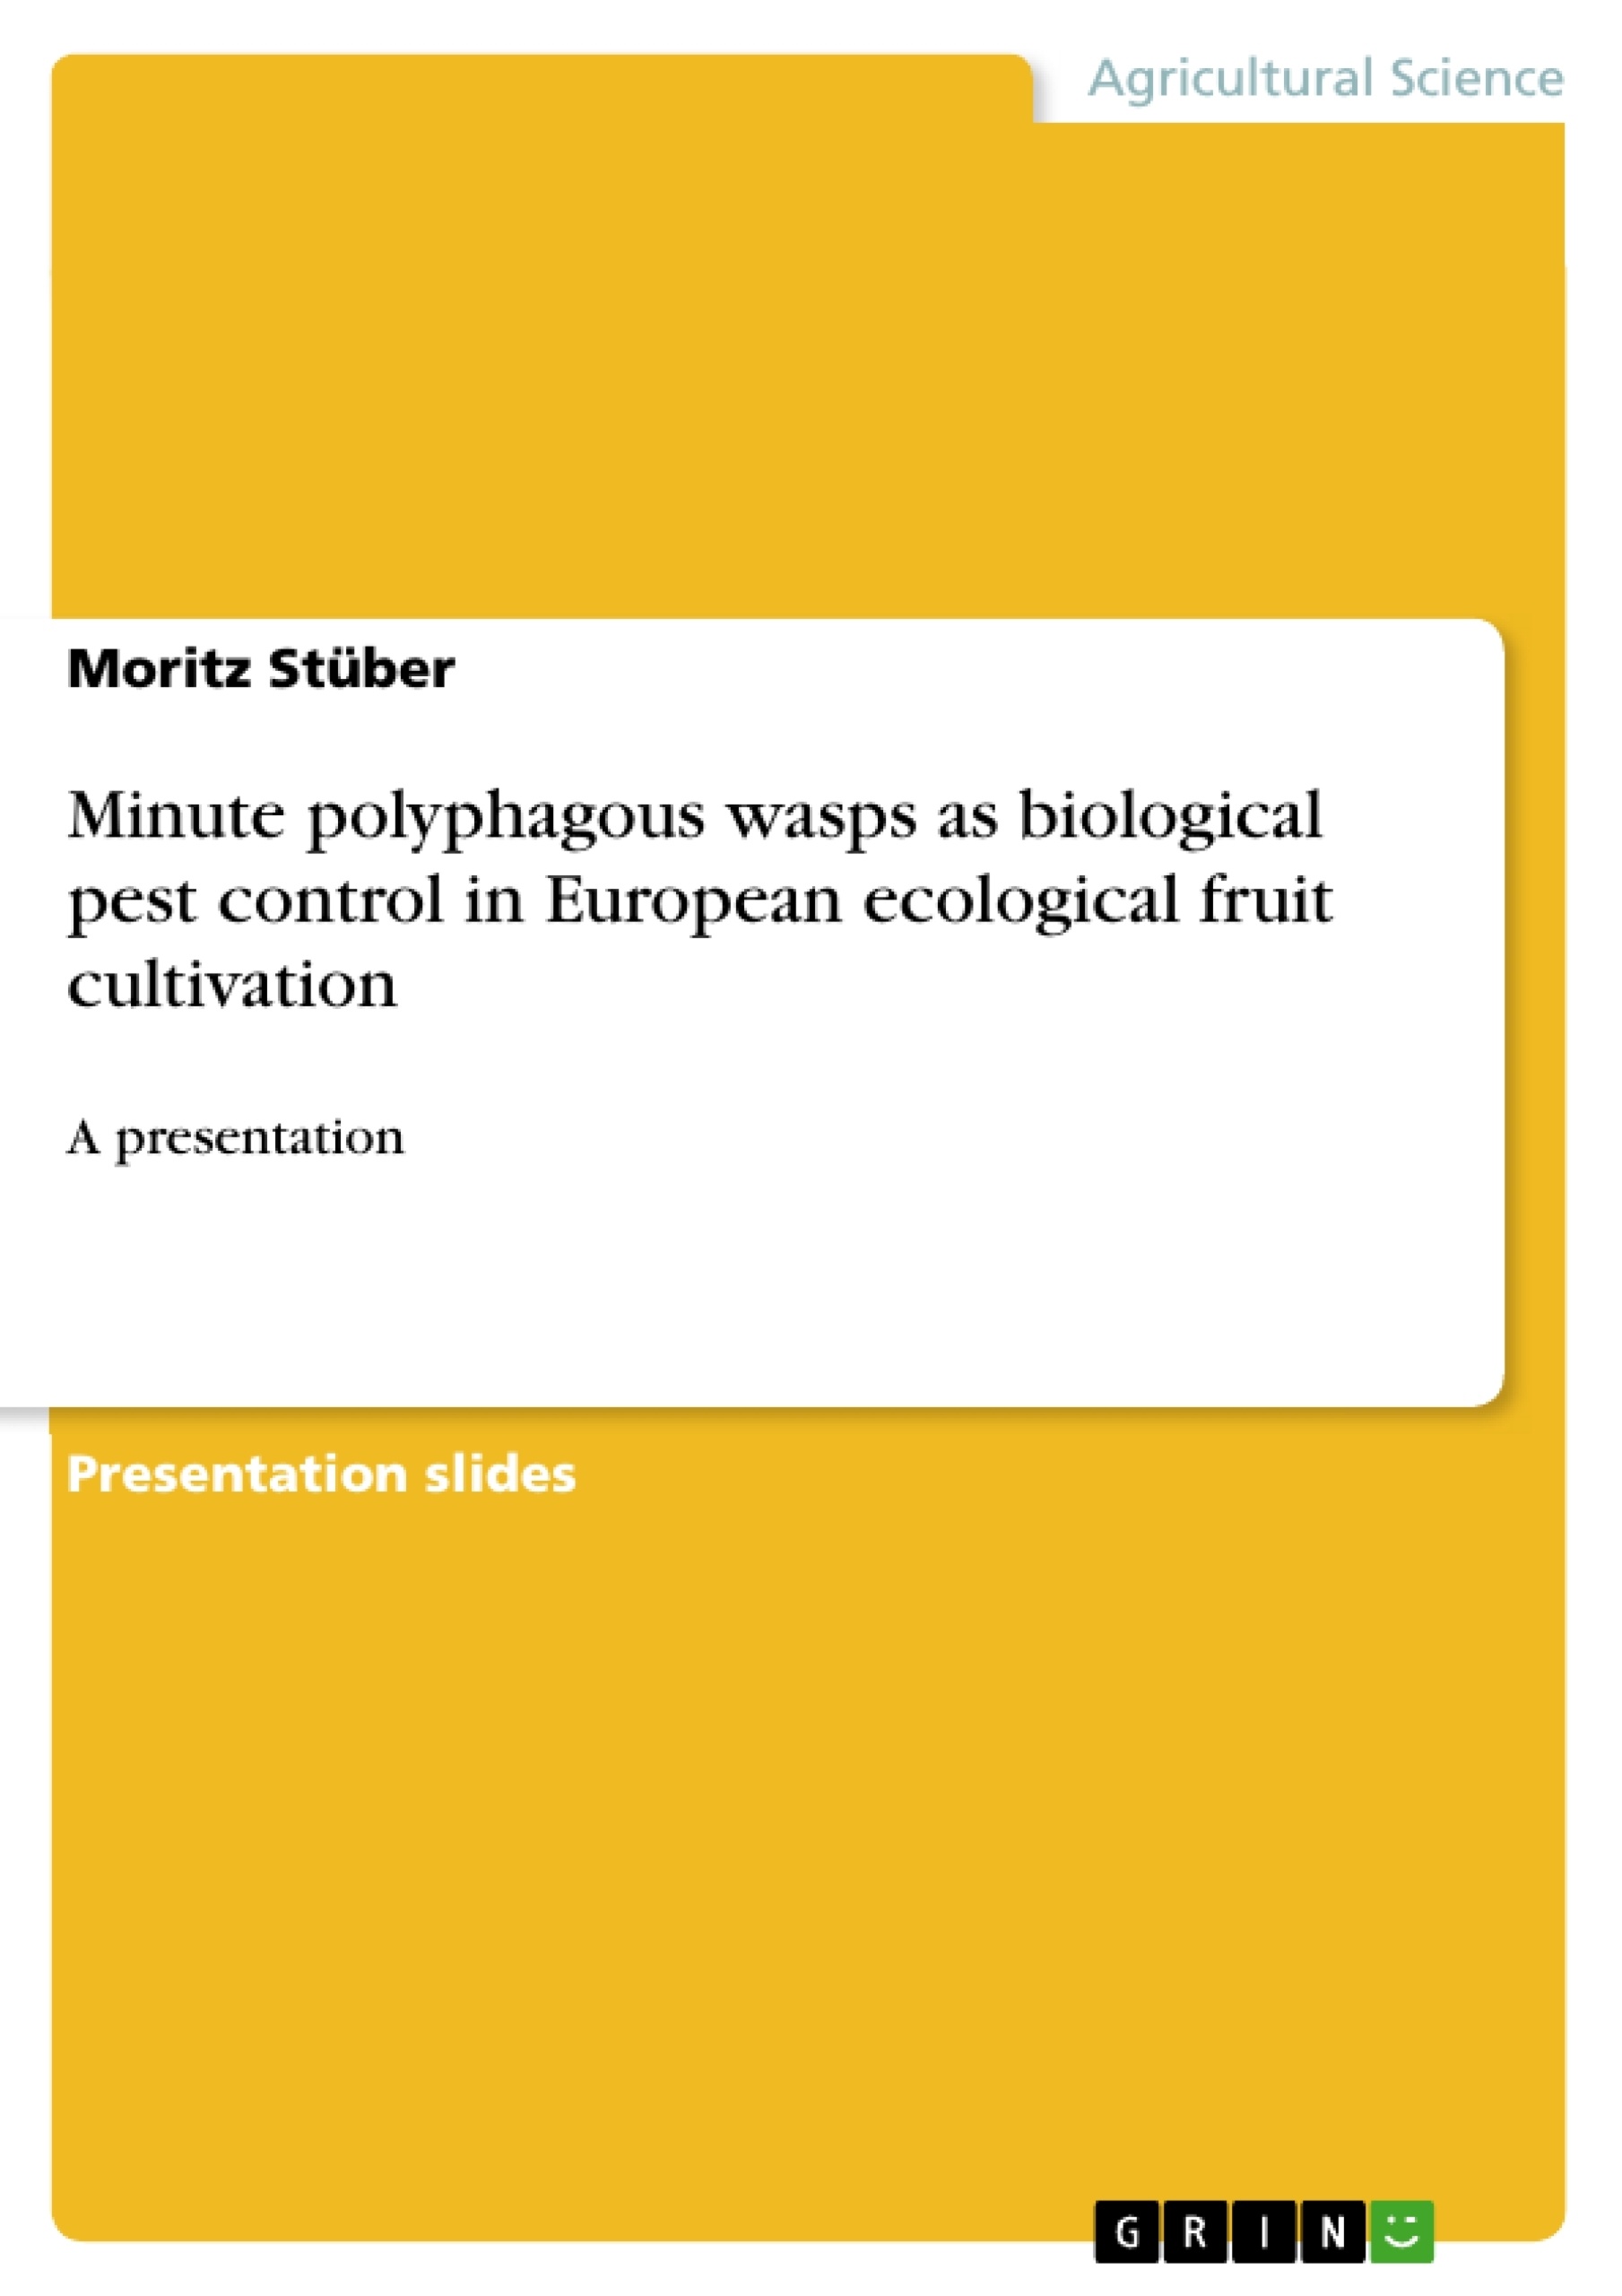 Title: Minute polyphagous wasps as biological pest control in European ecological fruit cultivation